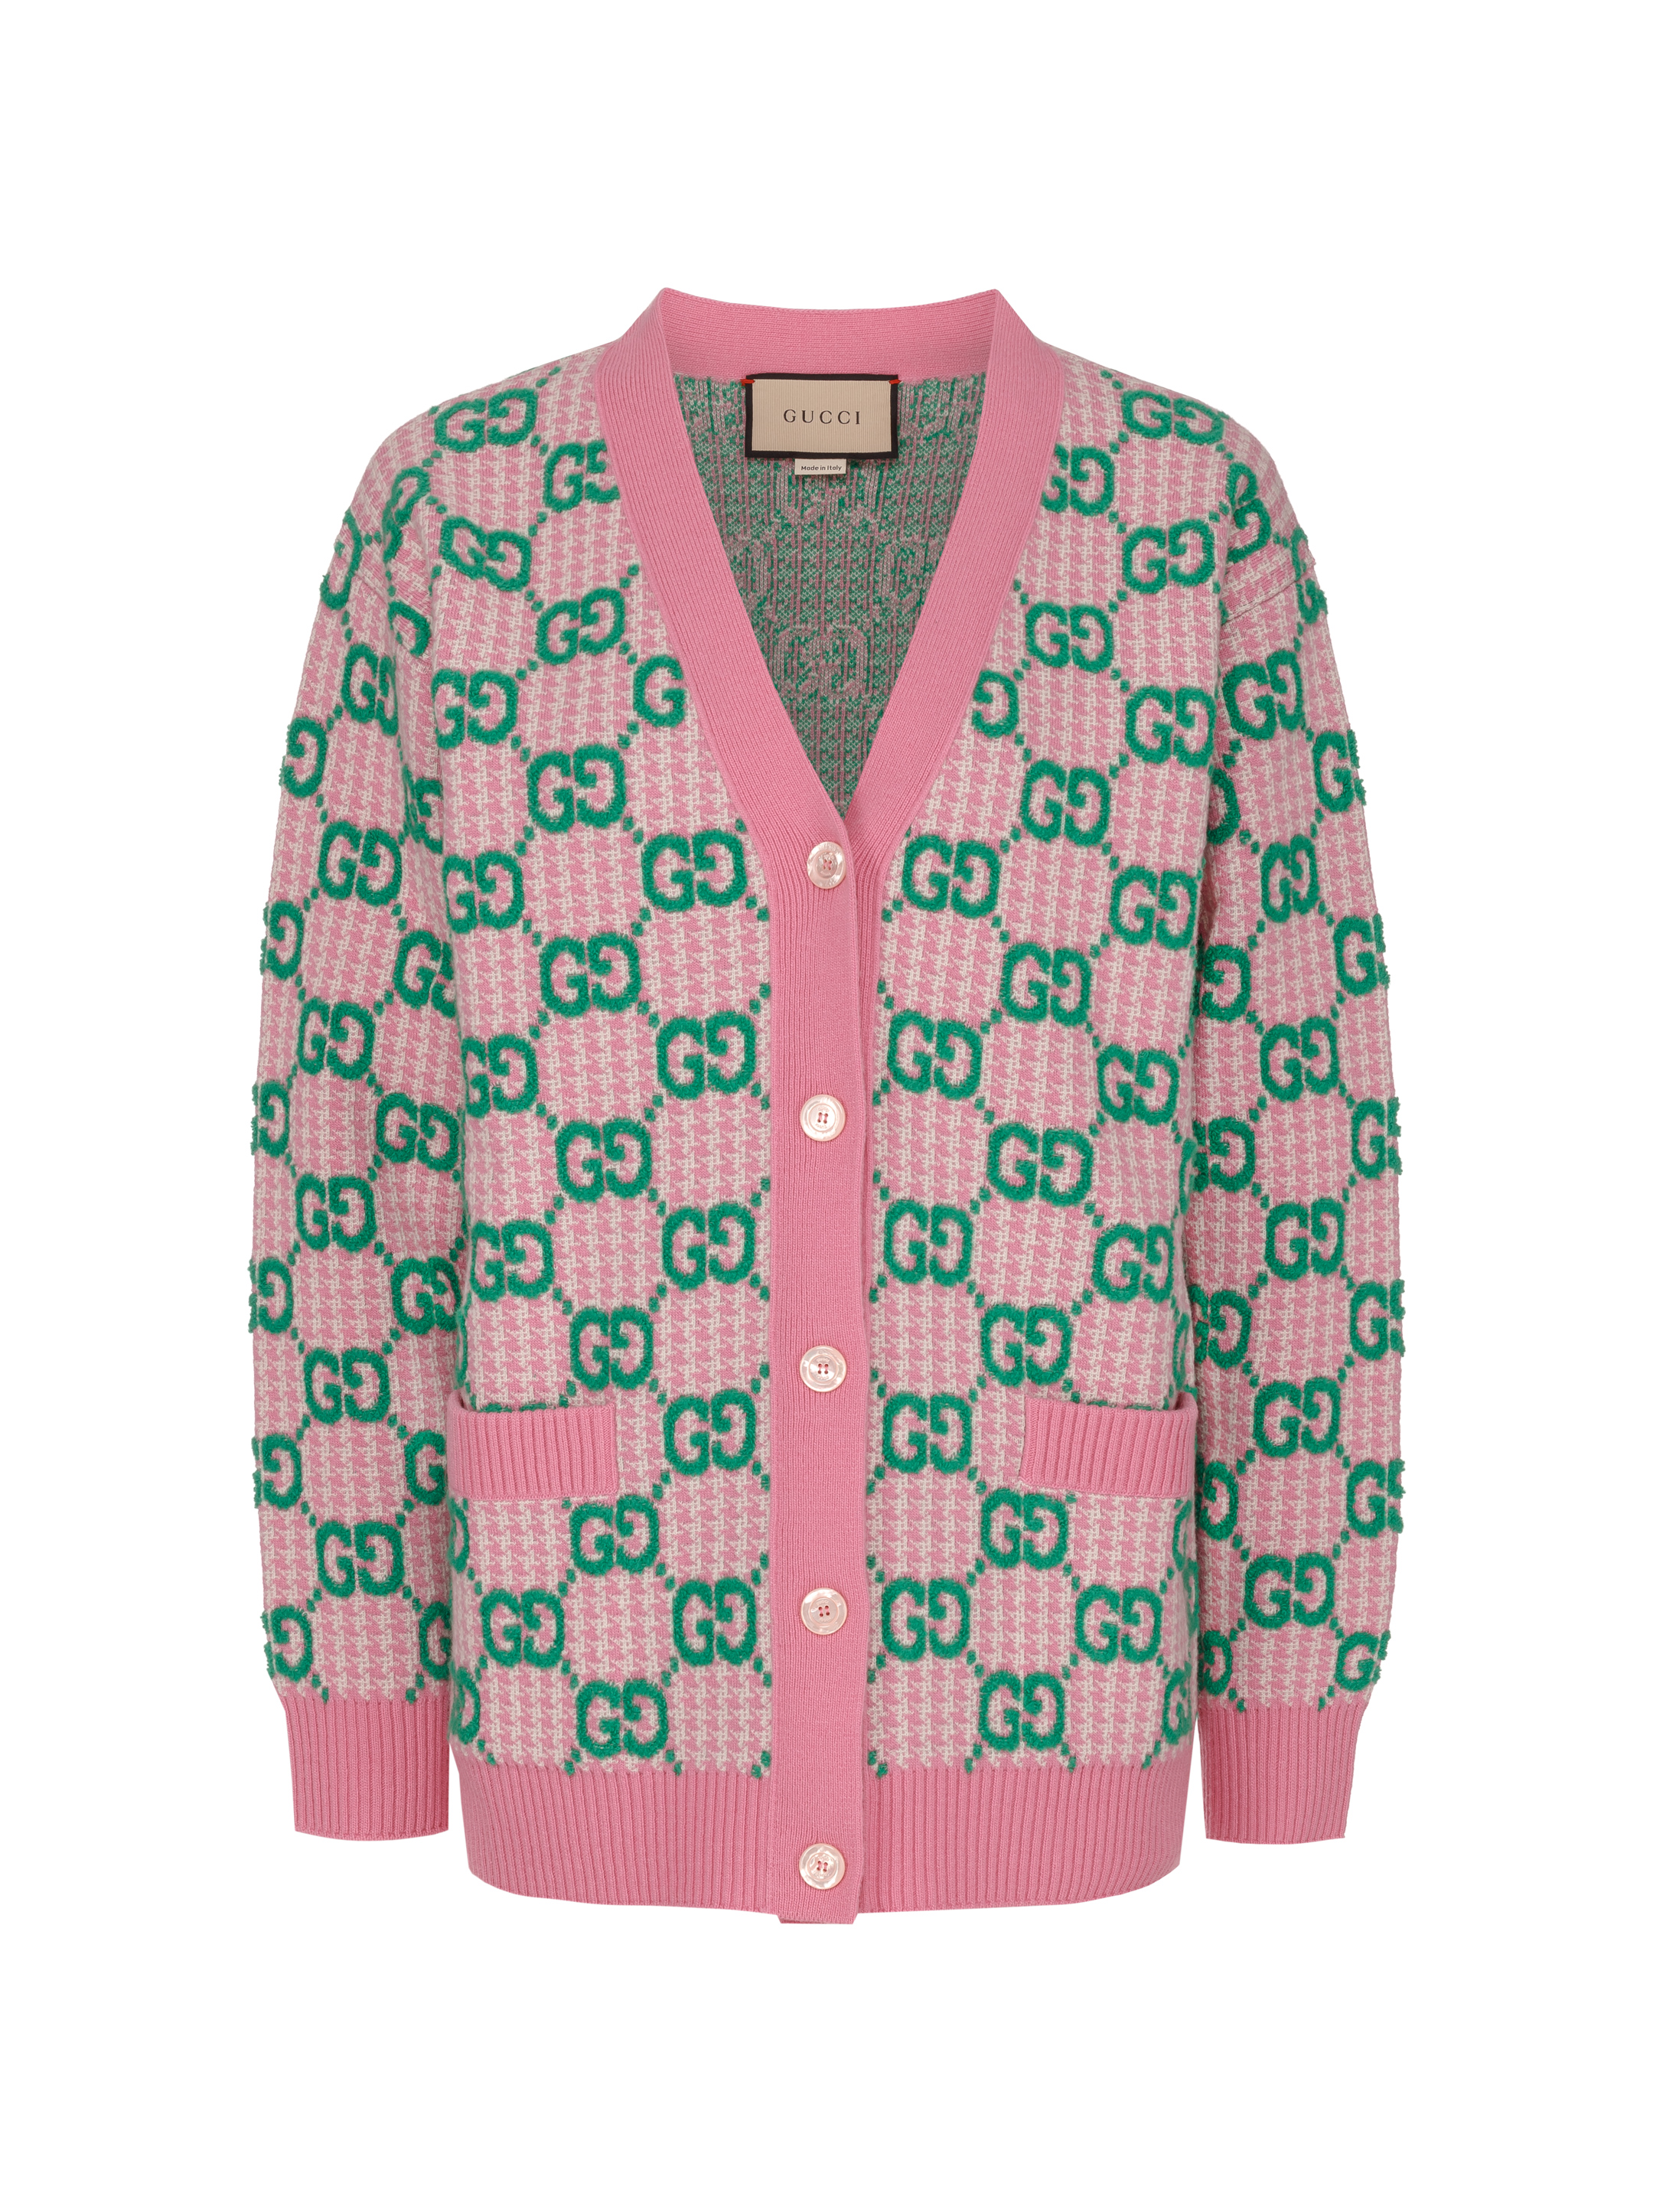 Gucci women's Wool cardigan with GG pattern - buy for 946200 KZT in the  official Viled online store, art. 727110 